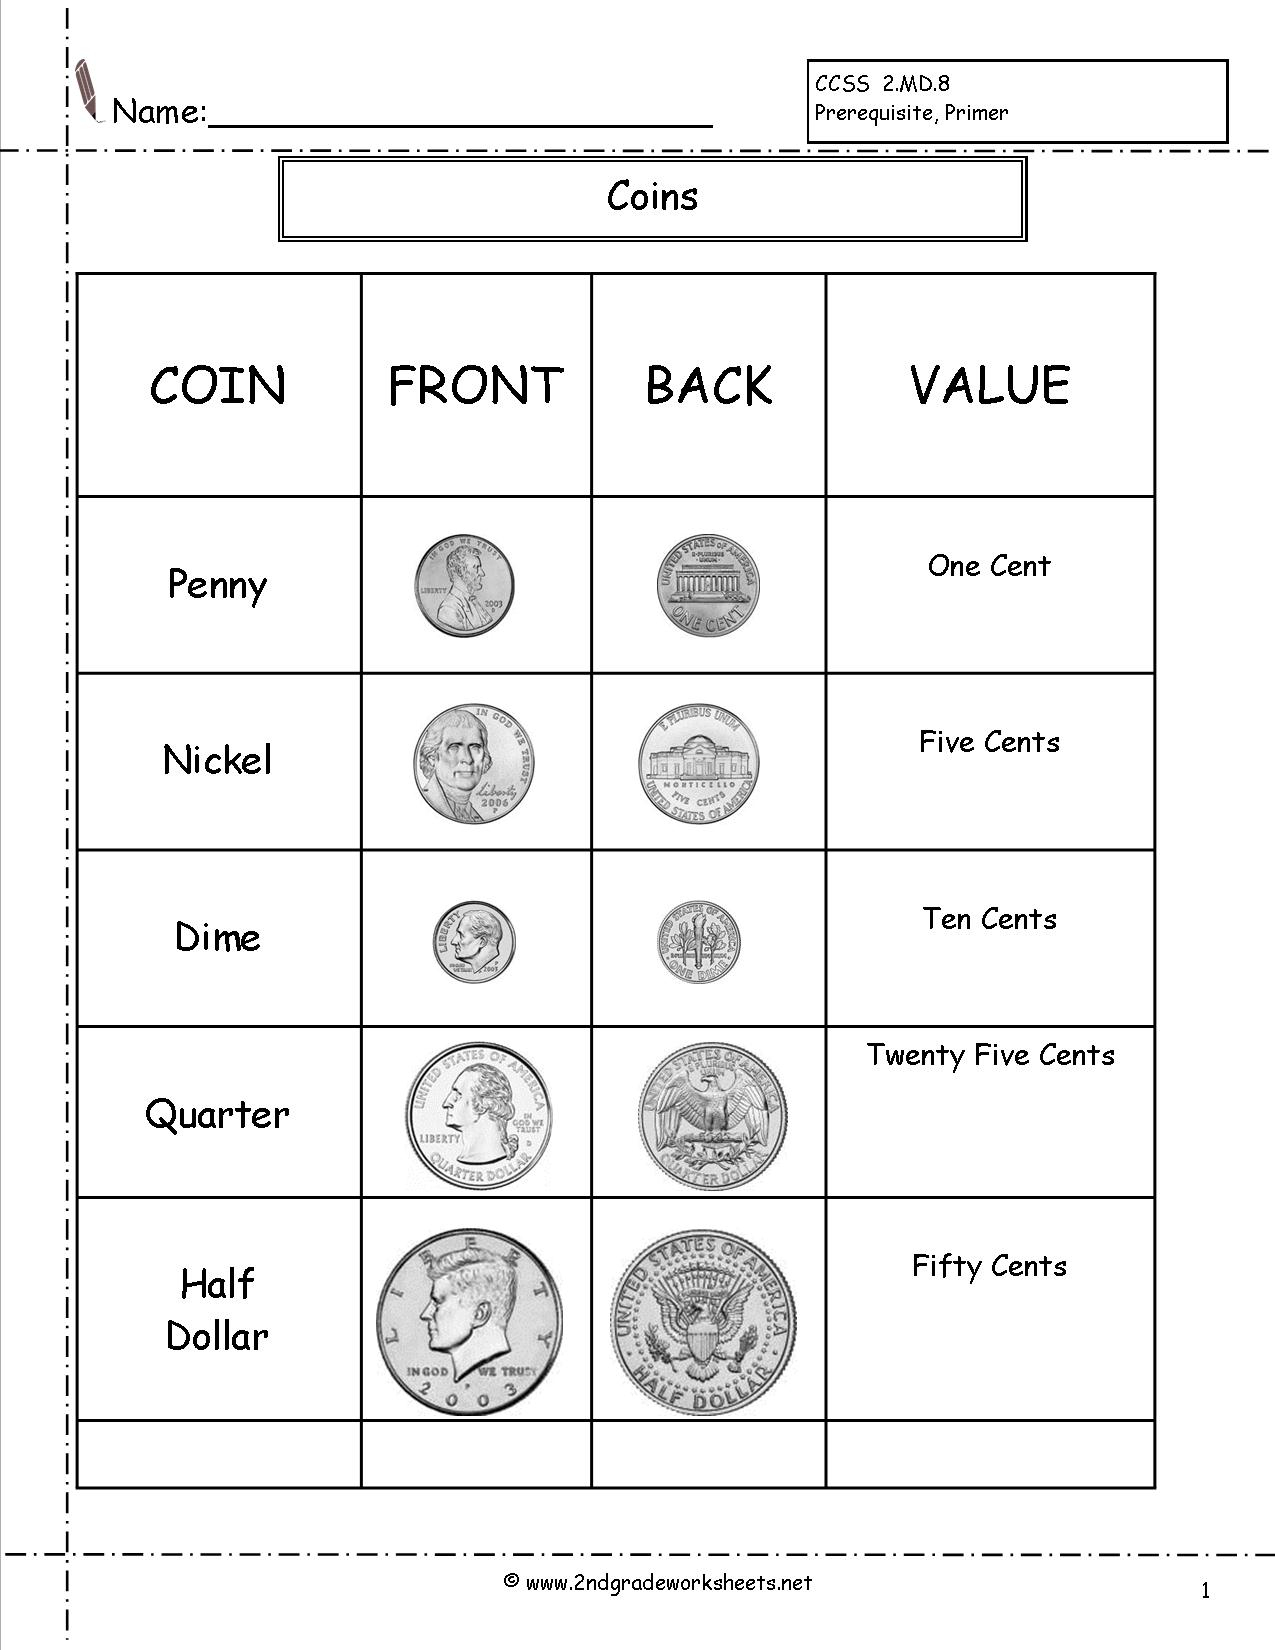 Counting Coins And Money Worksheets And Printouts - Free Printable Making Change Worksheets